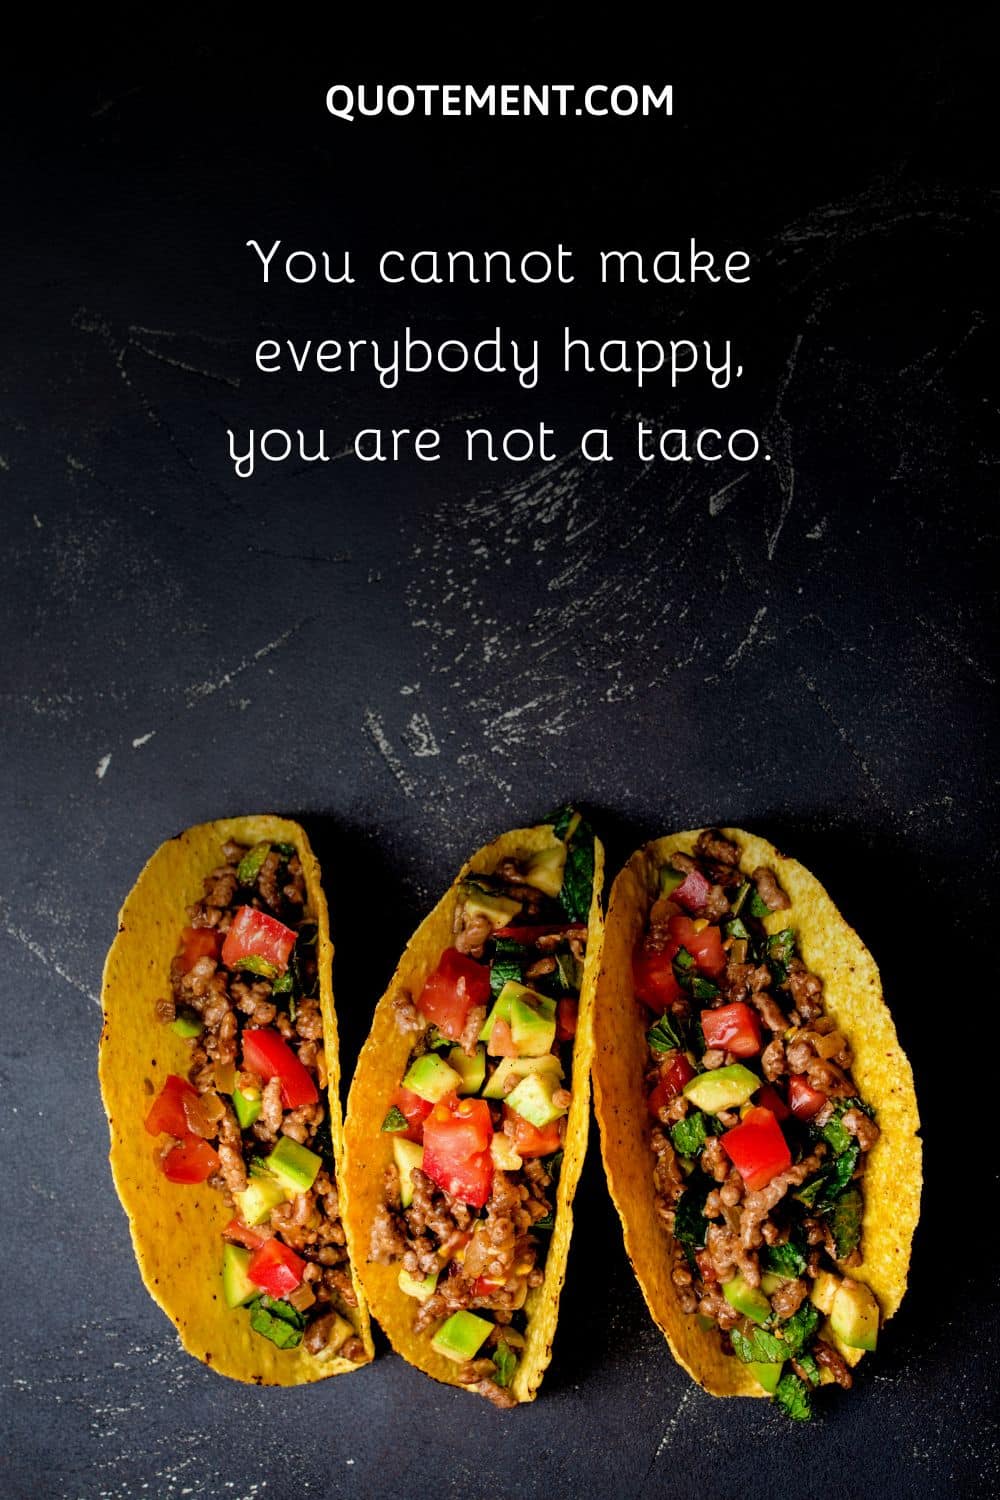 You cannot make everybody happy, you are not a taco